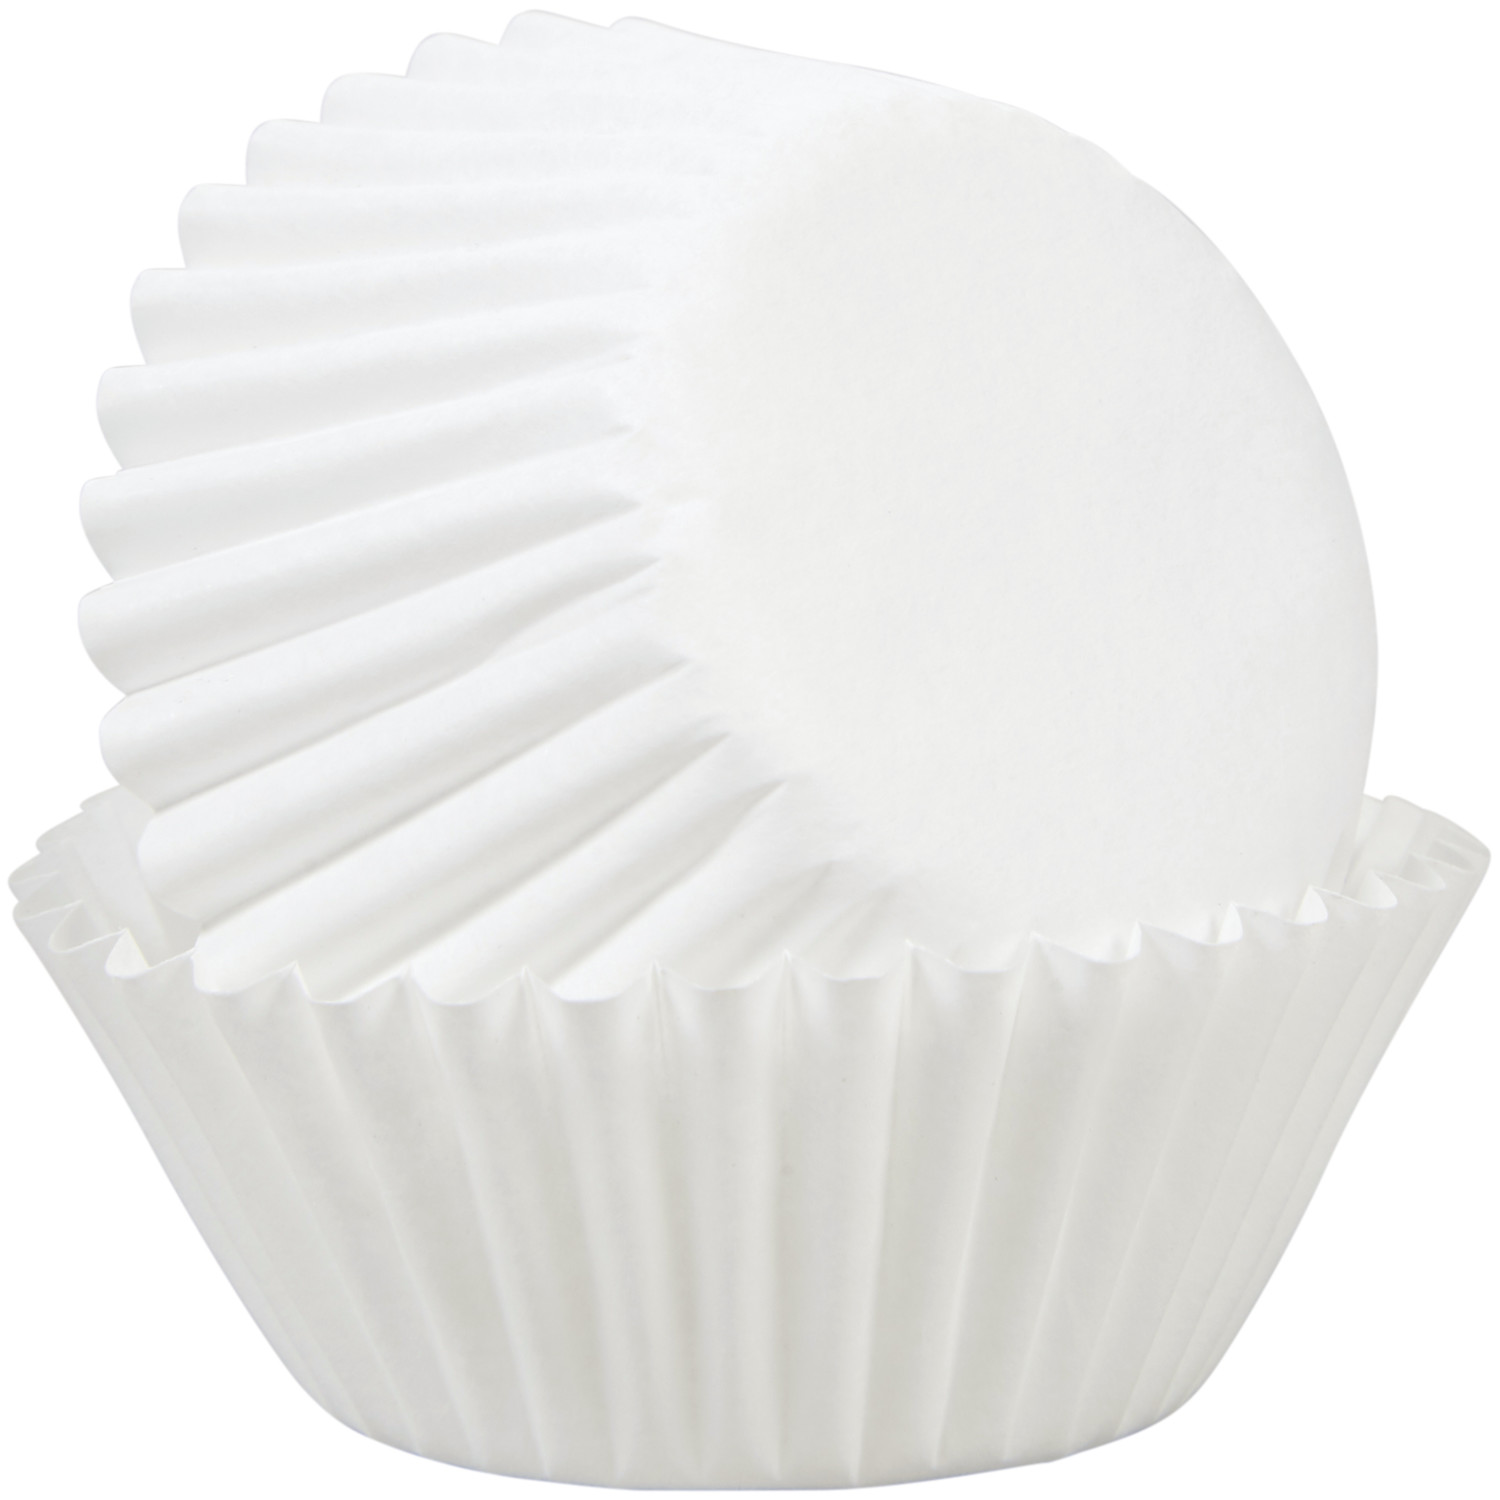 White Cupcake Liners - The Peppermill